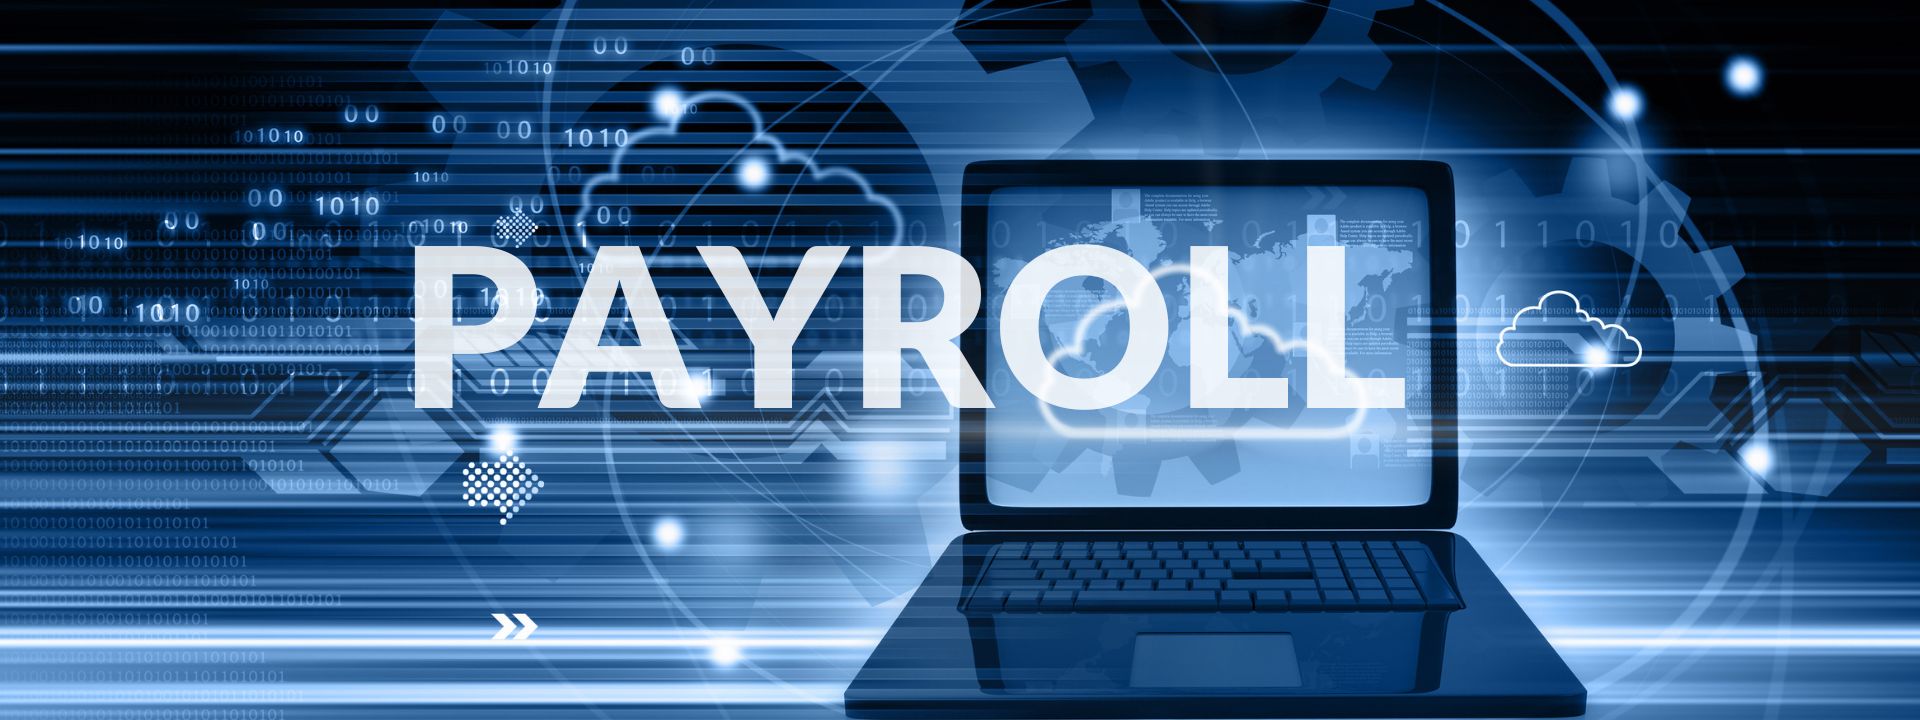 payroll management using cloud-based technology